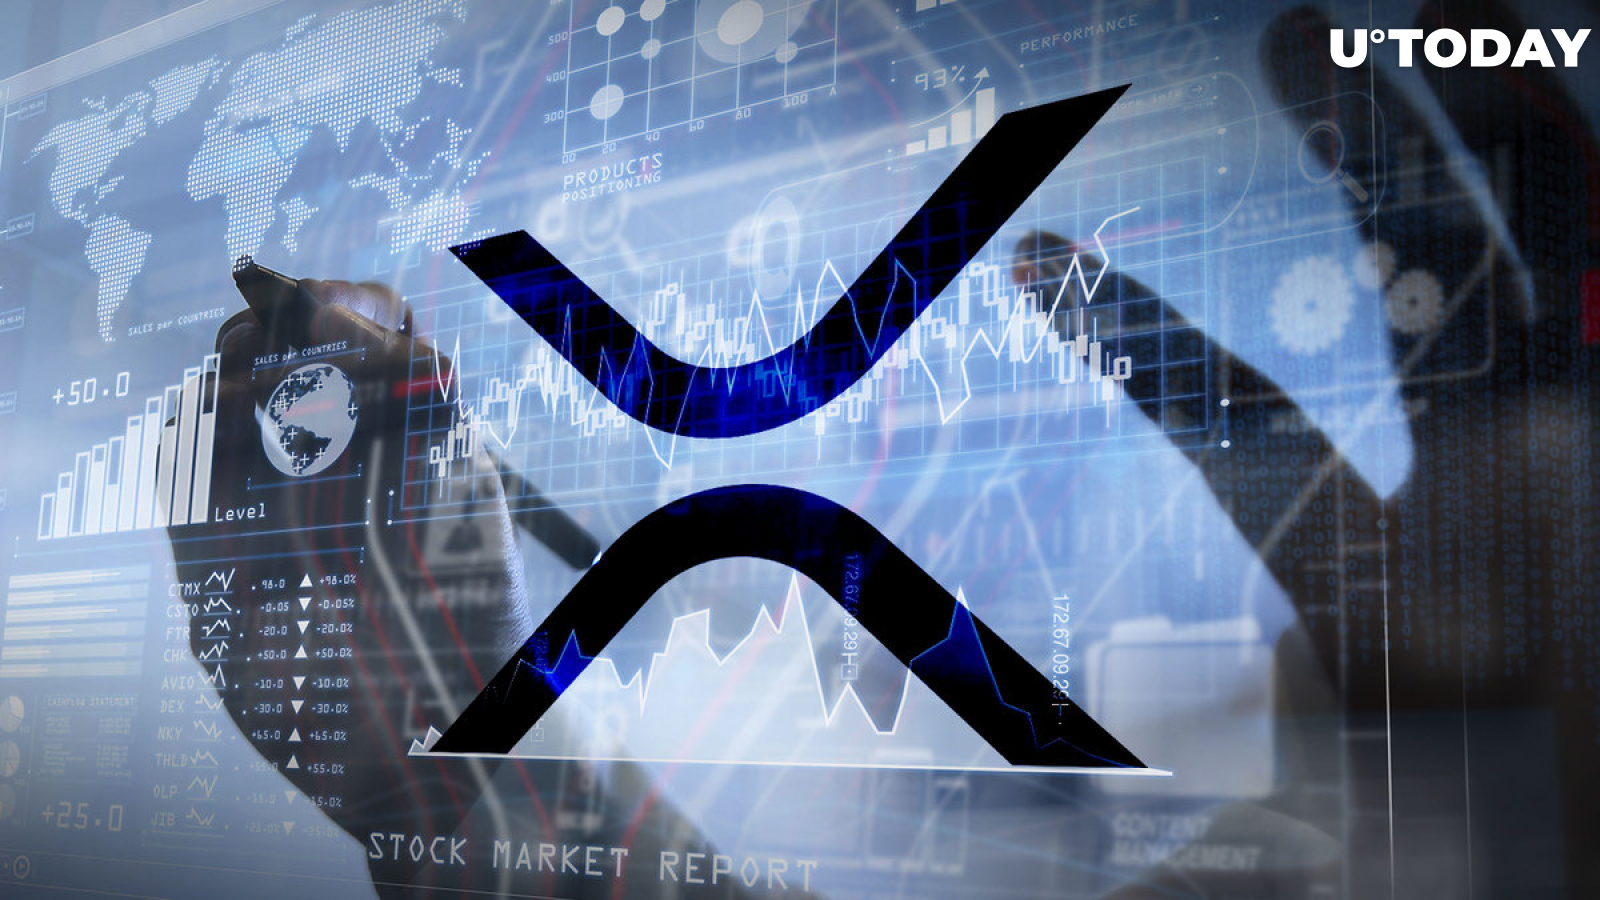 XRP Interests Traditional Investors, Funds Flows up 33% in Seven Days